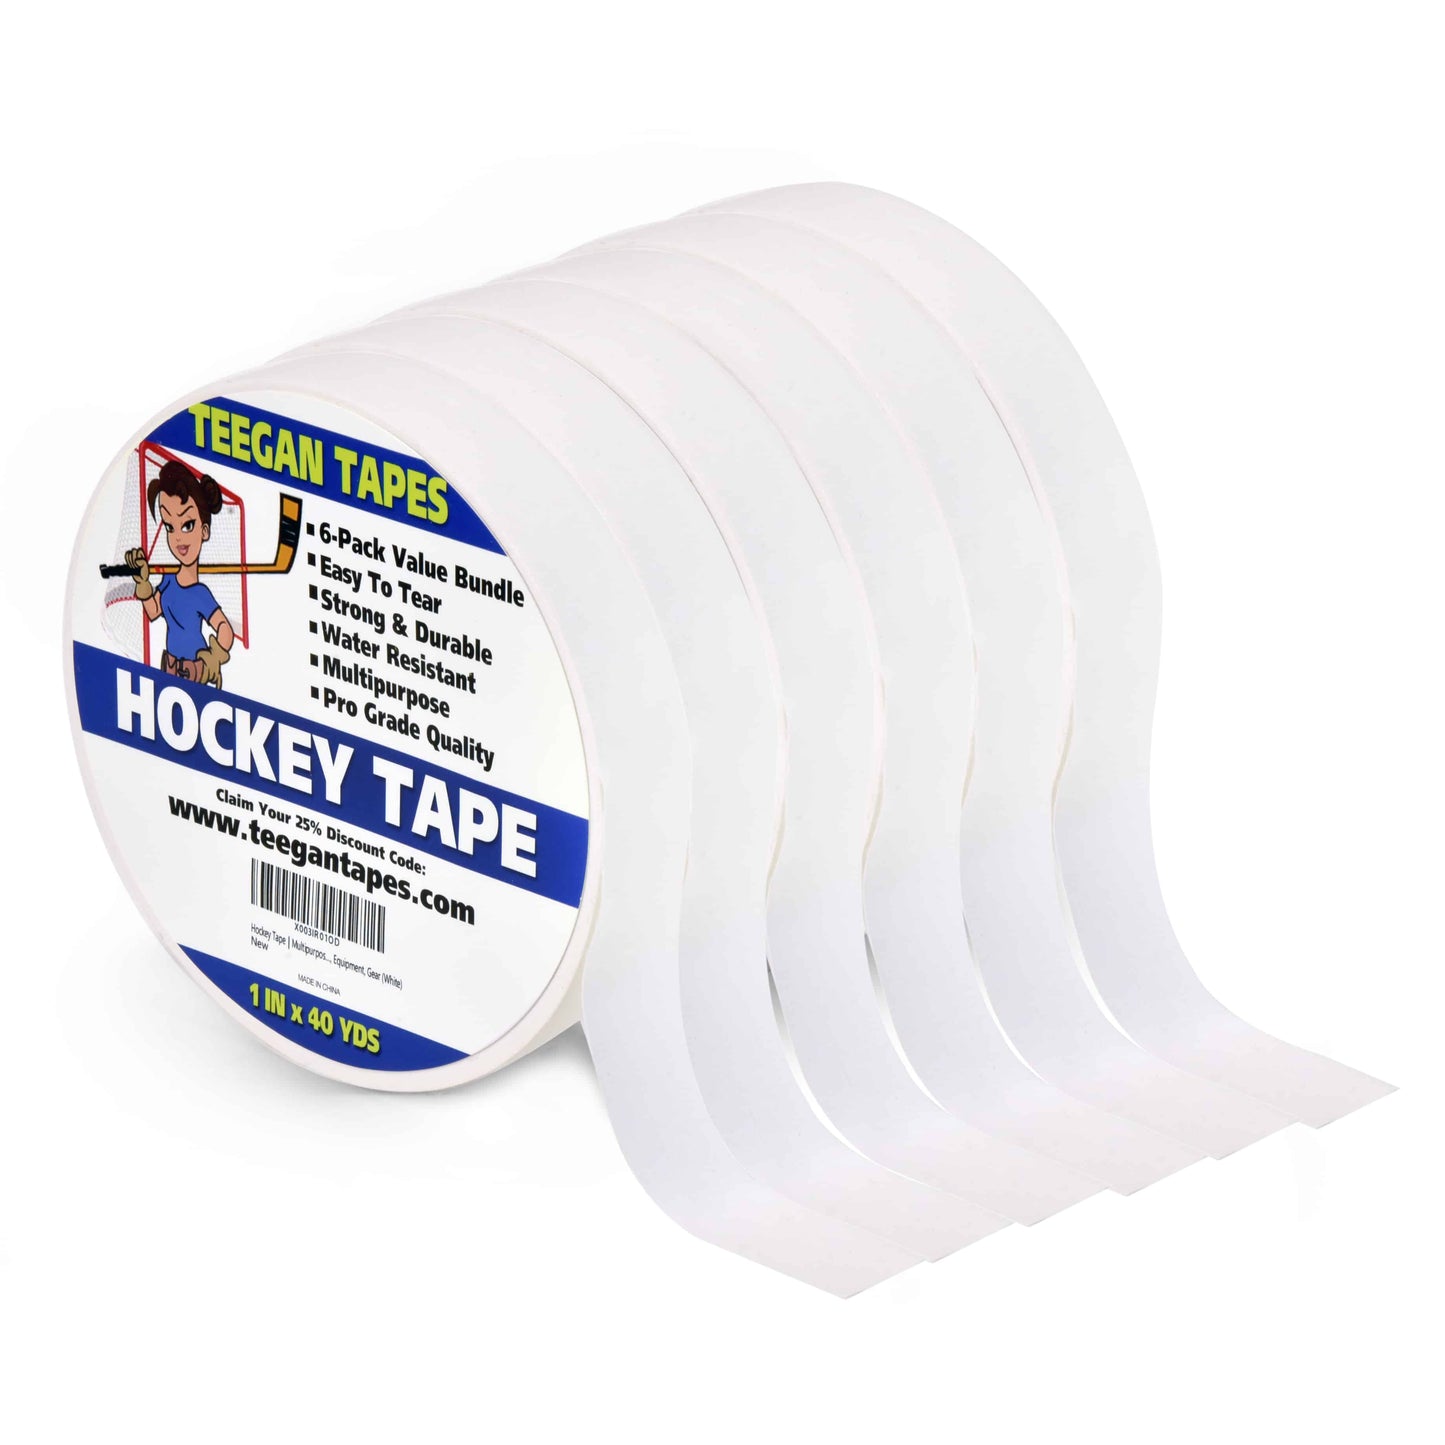 Hockey Tape | Multipurpose Cloth Tape Roll for Ice & Roller Hockey Stick, Blade & Handle Protector | 6-Pack | 1" X 40 Yards | White